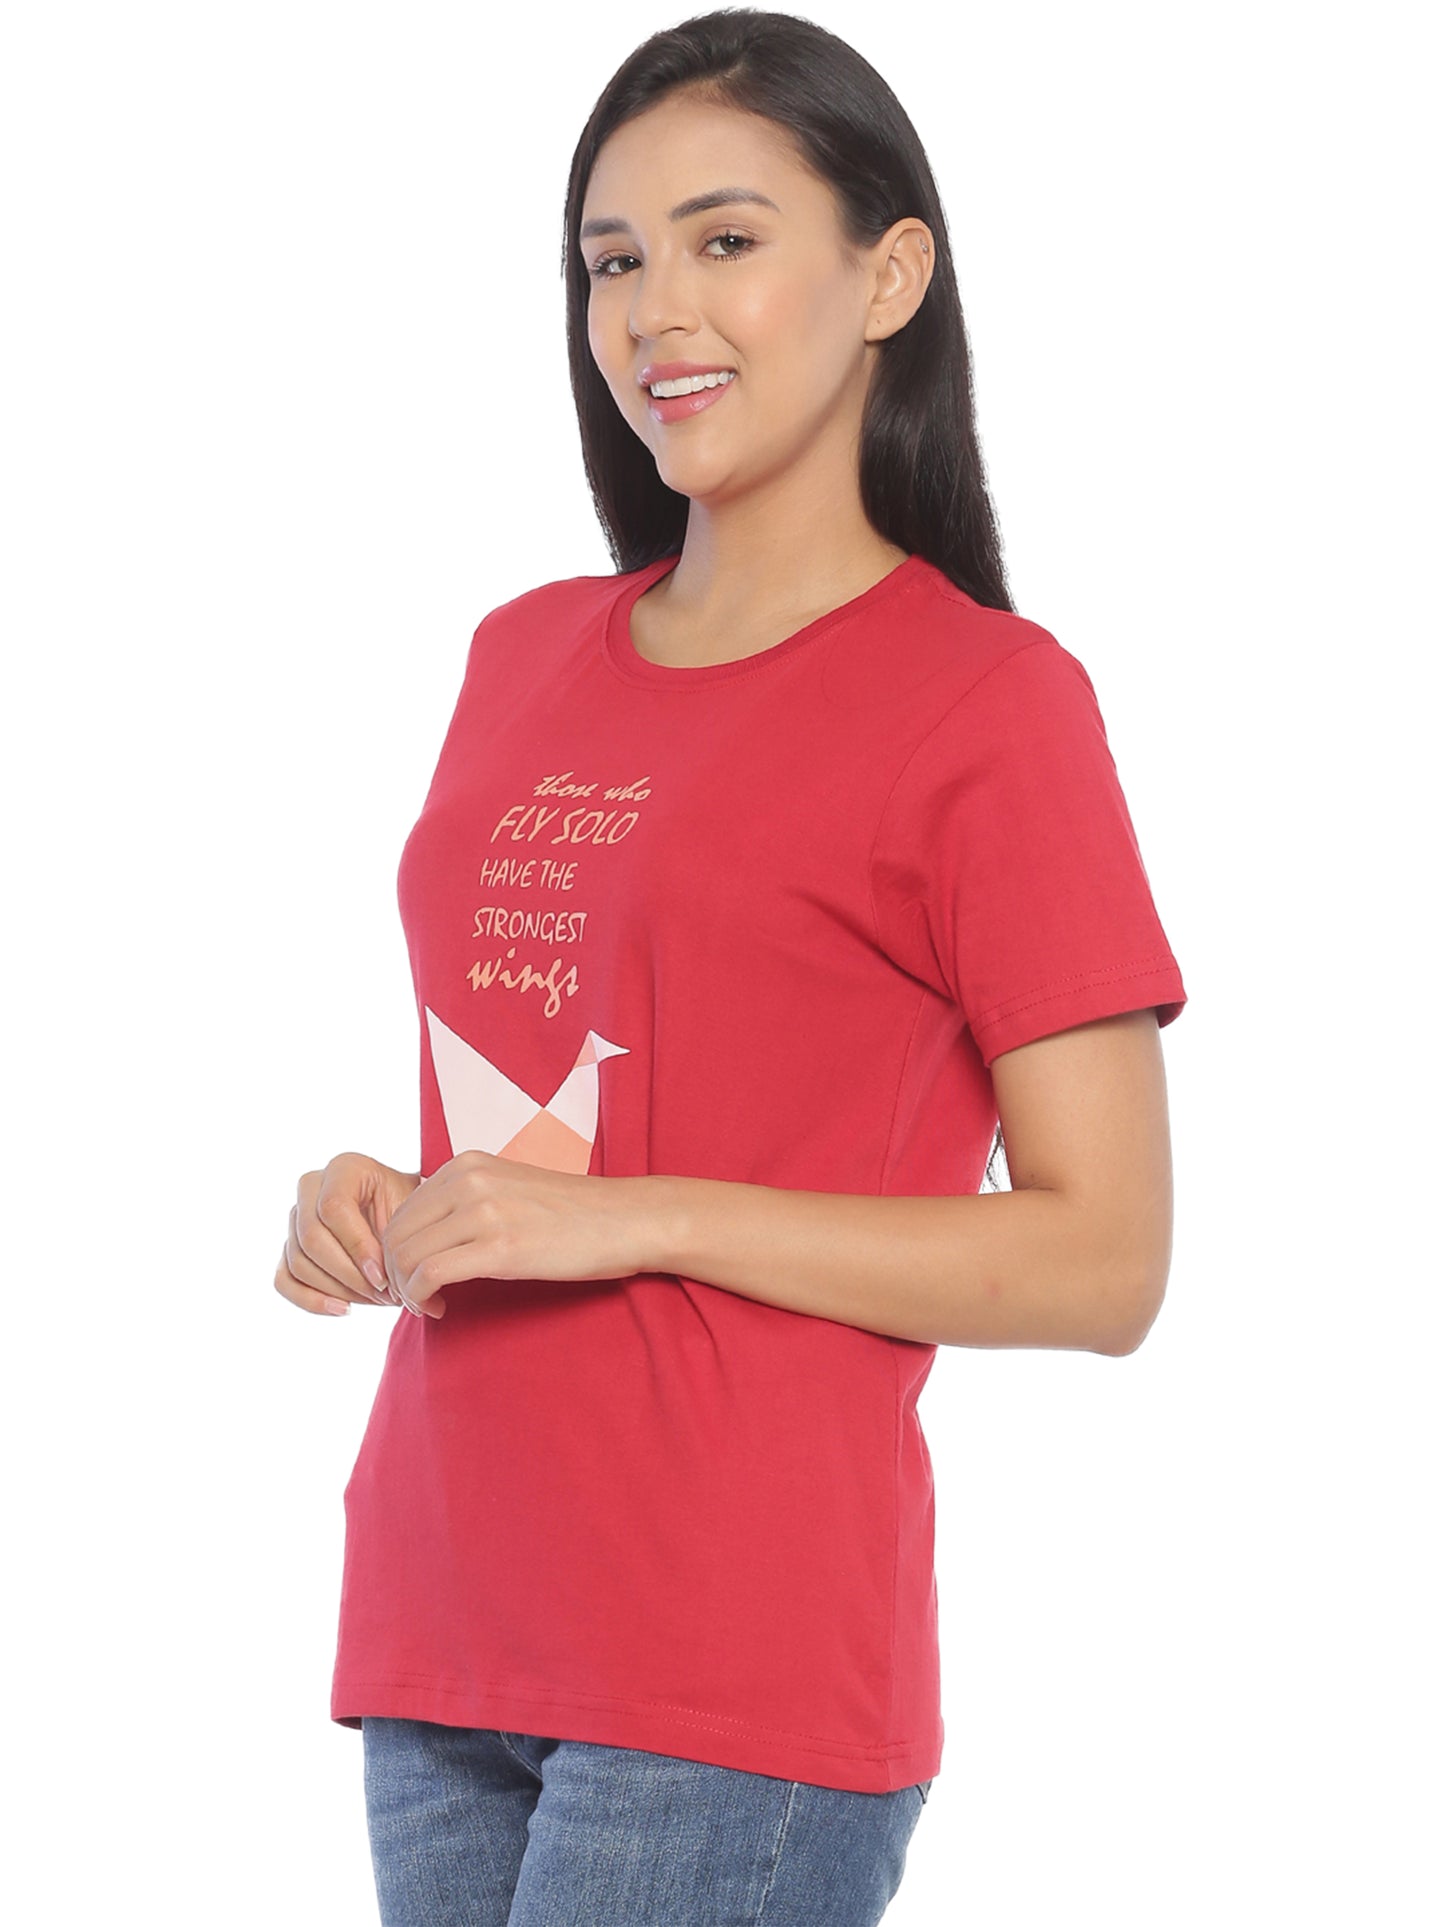 Women's Printed T-shirt(Fly Solo)